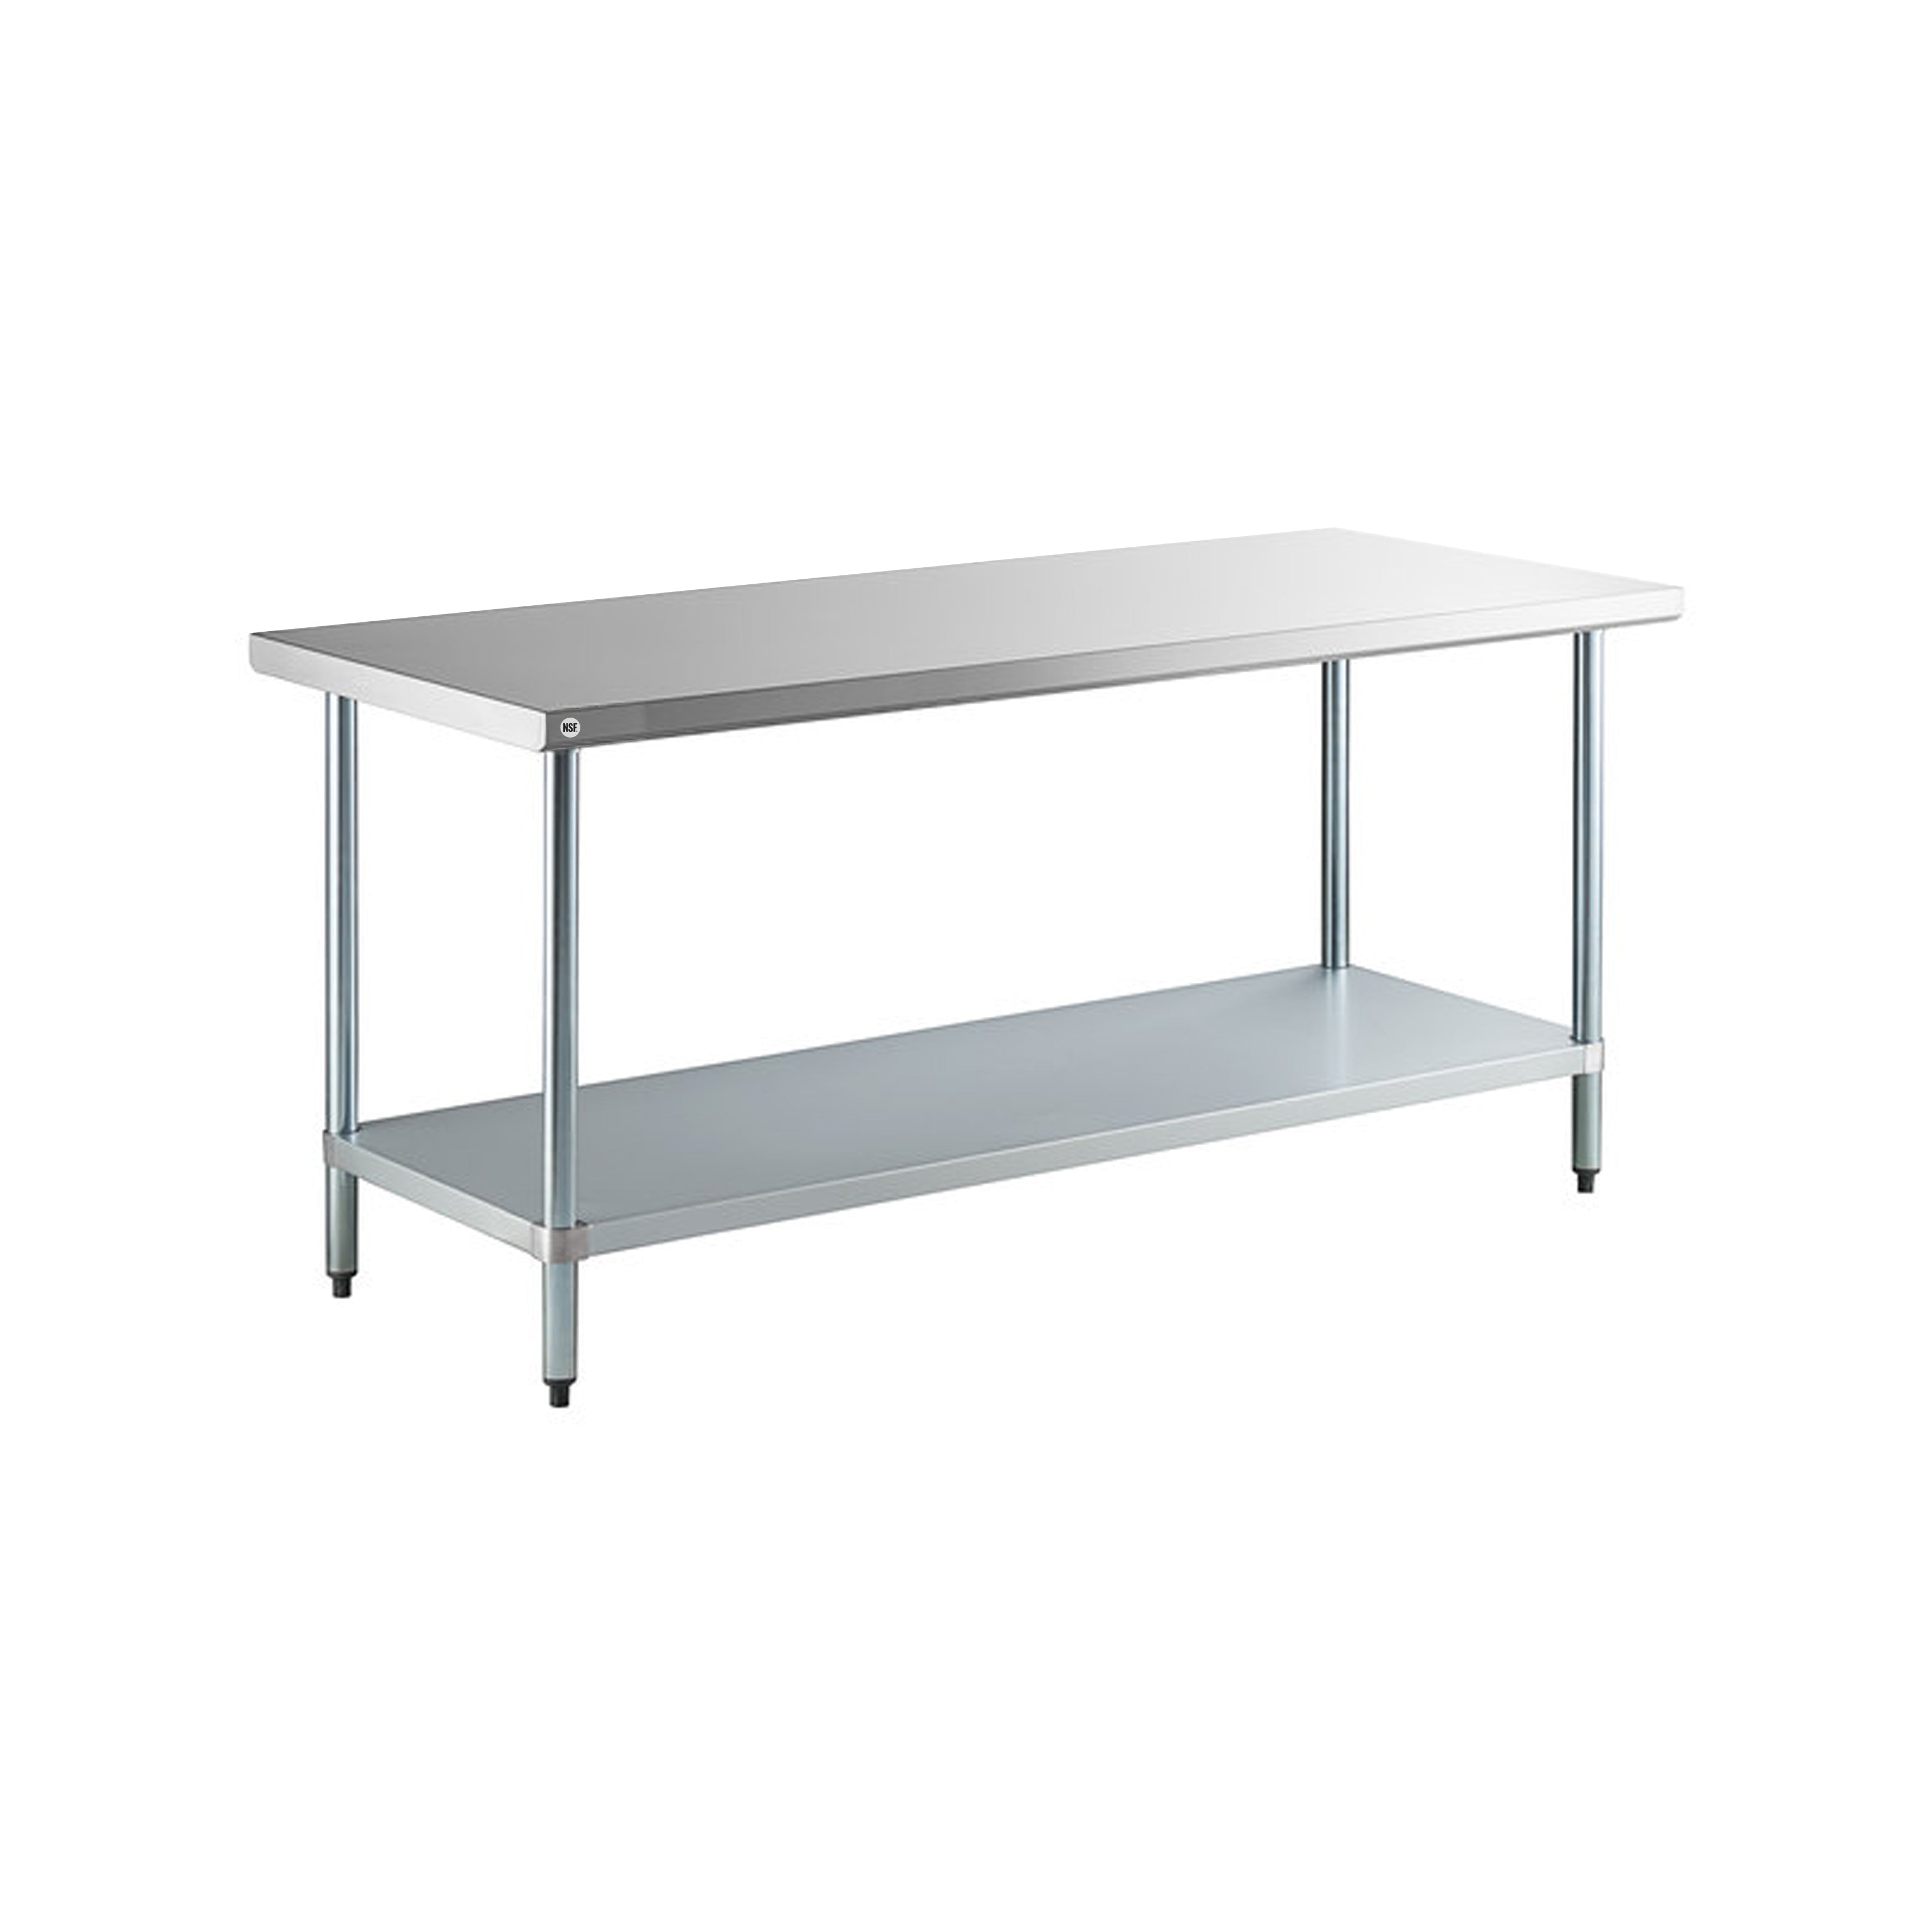 Omcan - 43183, Commercial 30" x 18" Stainless Steel Kitchen Work Table 385lbs Light Duty